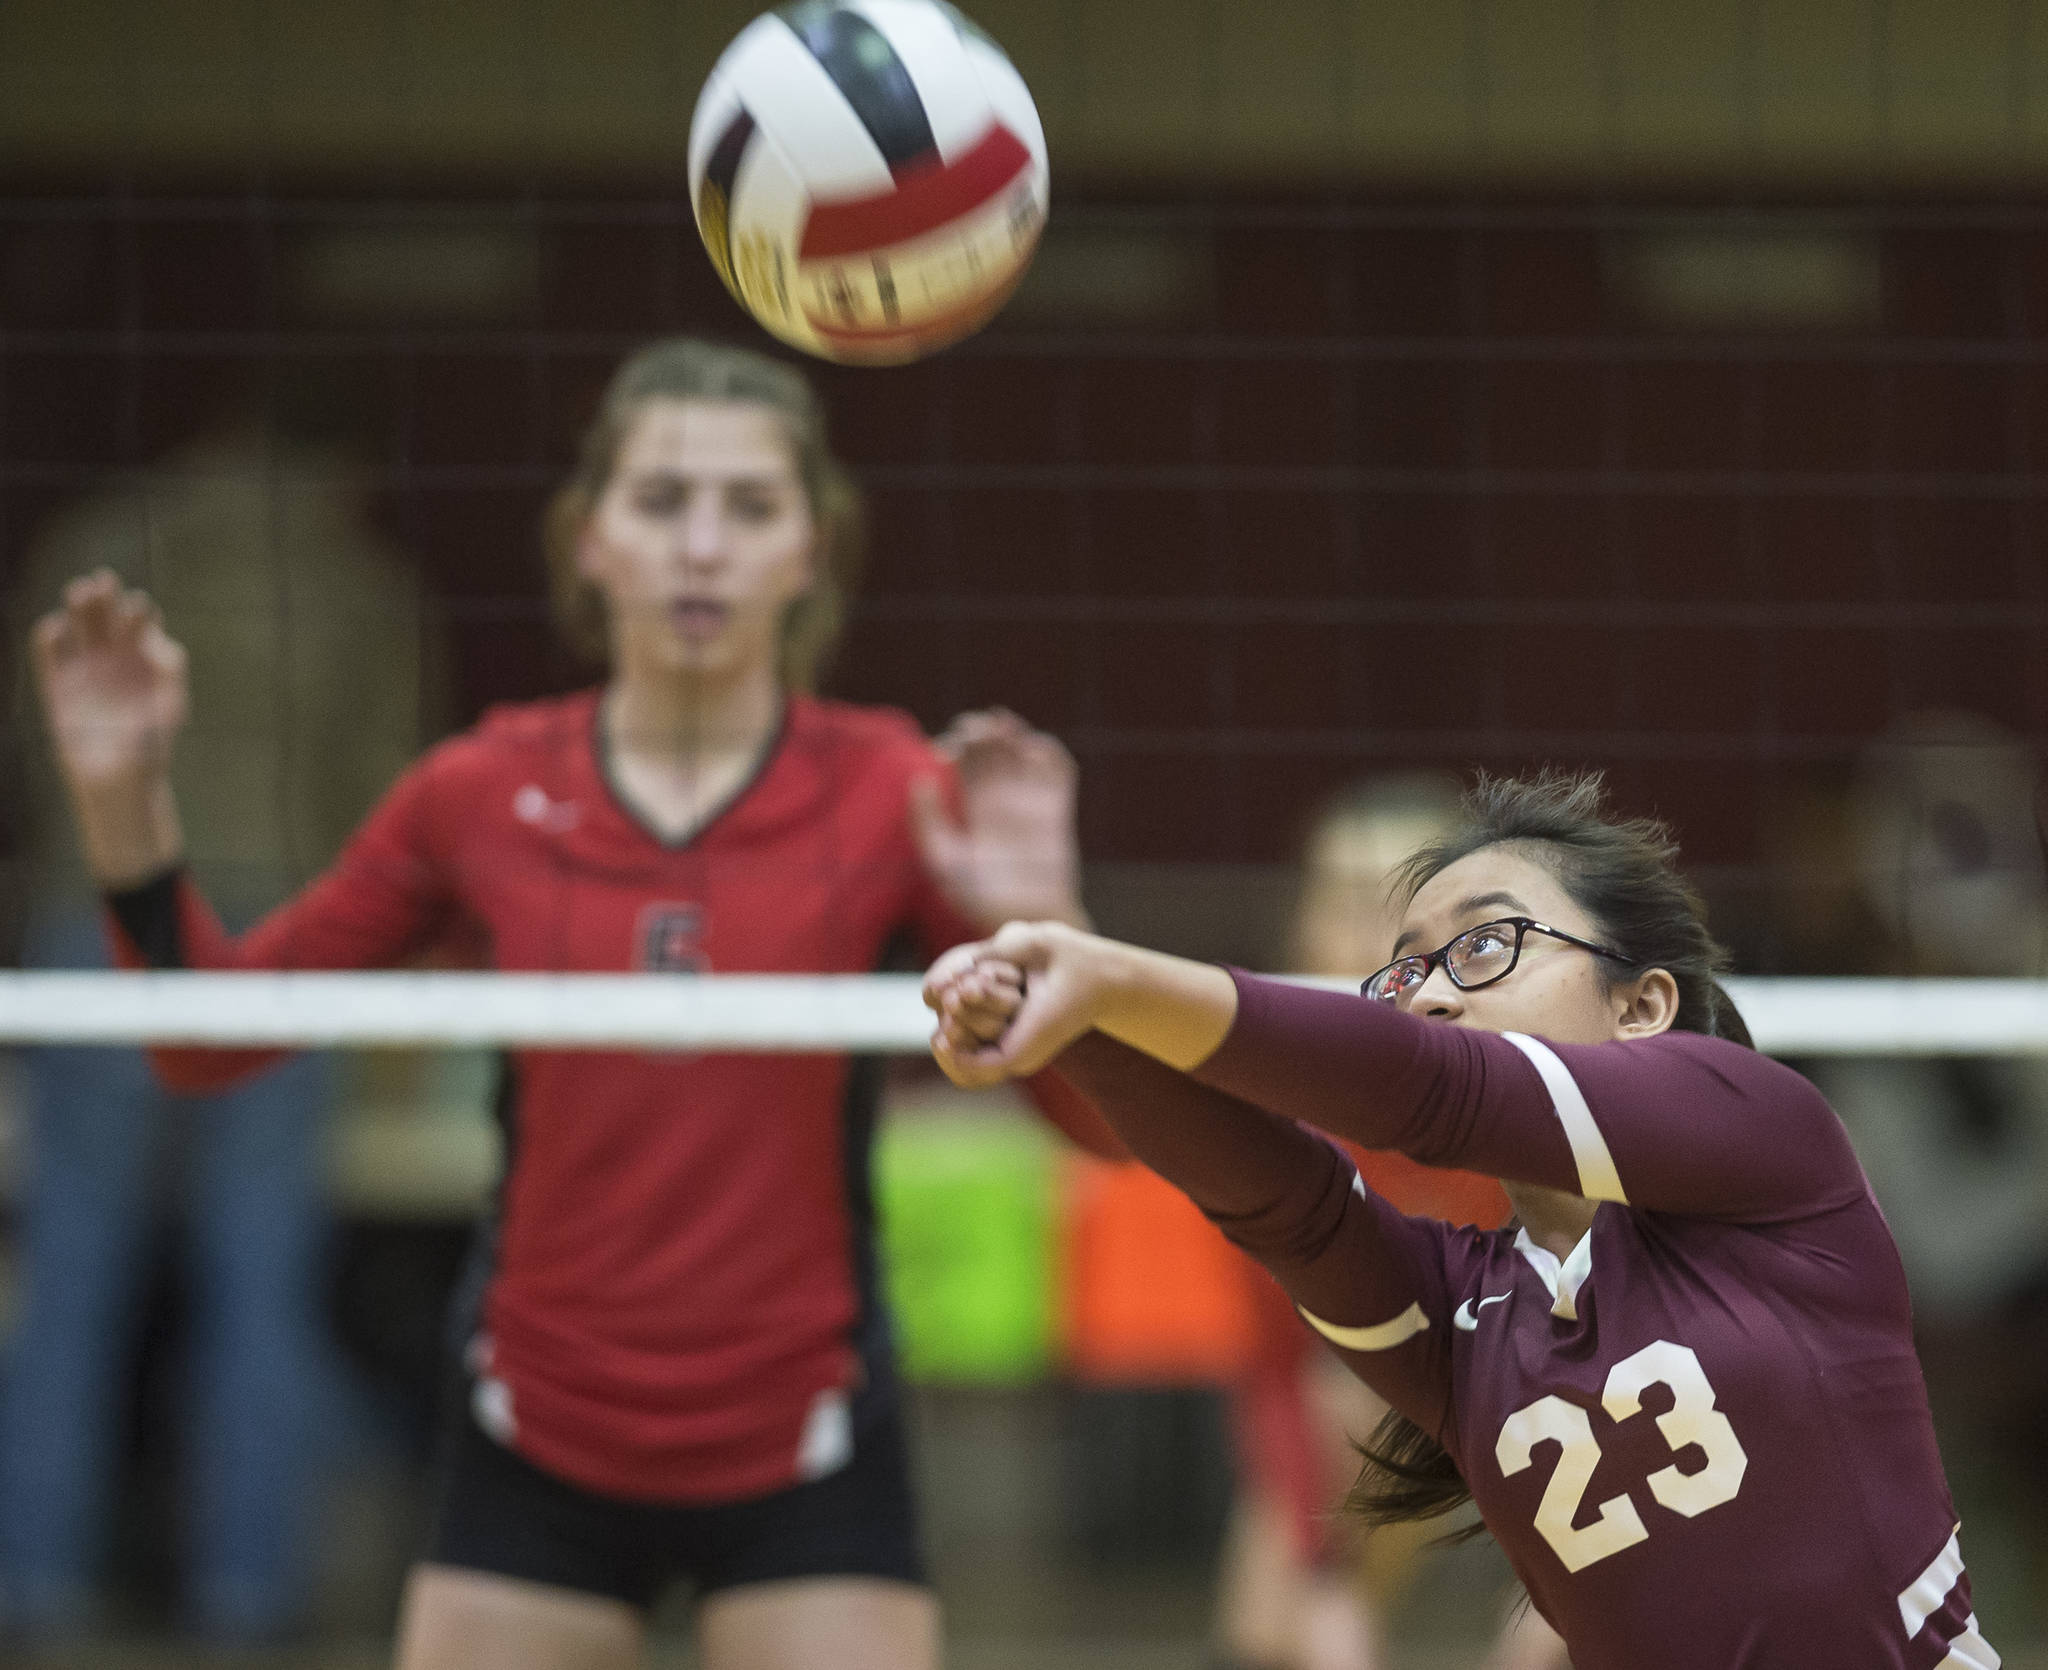 Ketchikan’s Karen Abigania bumps the ball up against Juneau-Douglas High School in the first round of the Region V Volleyball Championships at JDHS on Friday, Nov. 2, 2018. JDHS won 3-0 (25-13, 25-16, 25-16). (Michael Penn | Juneau Empire)